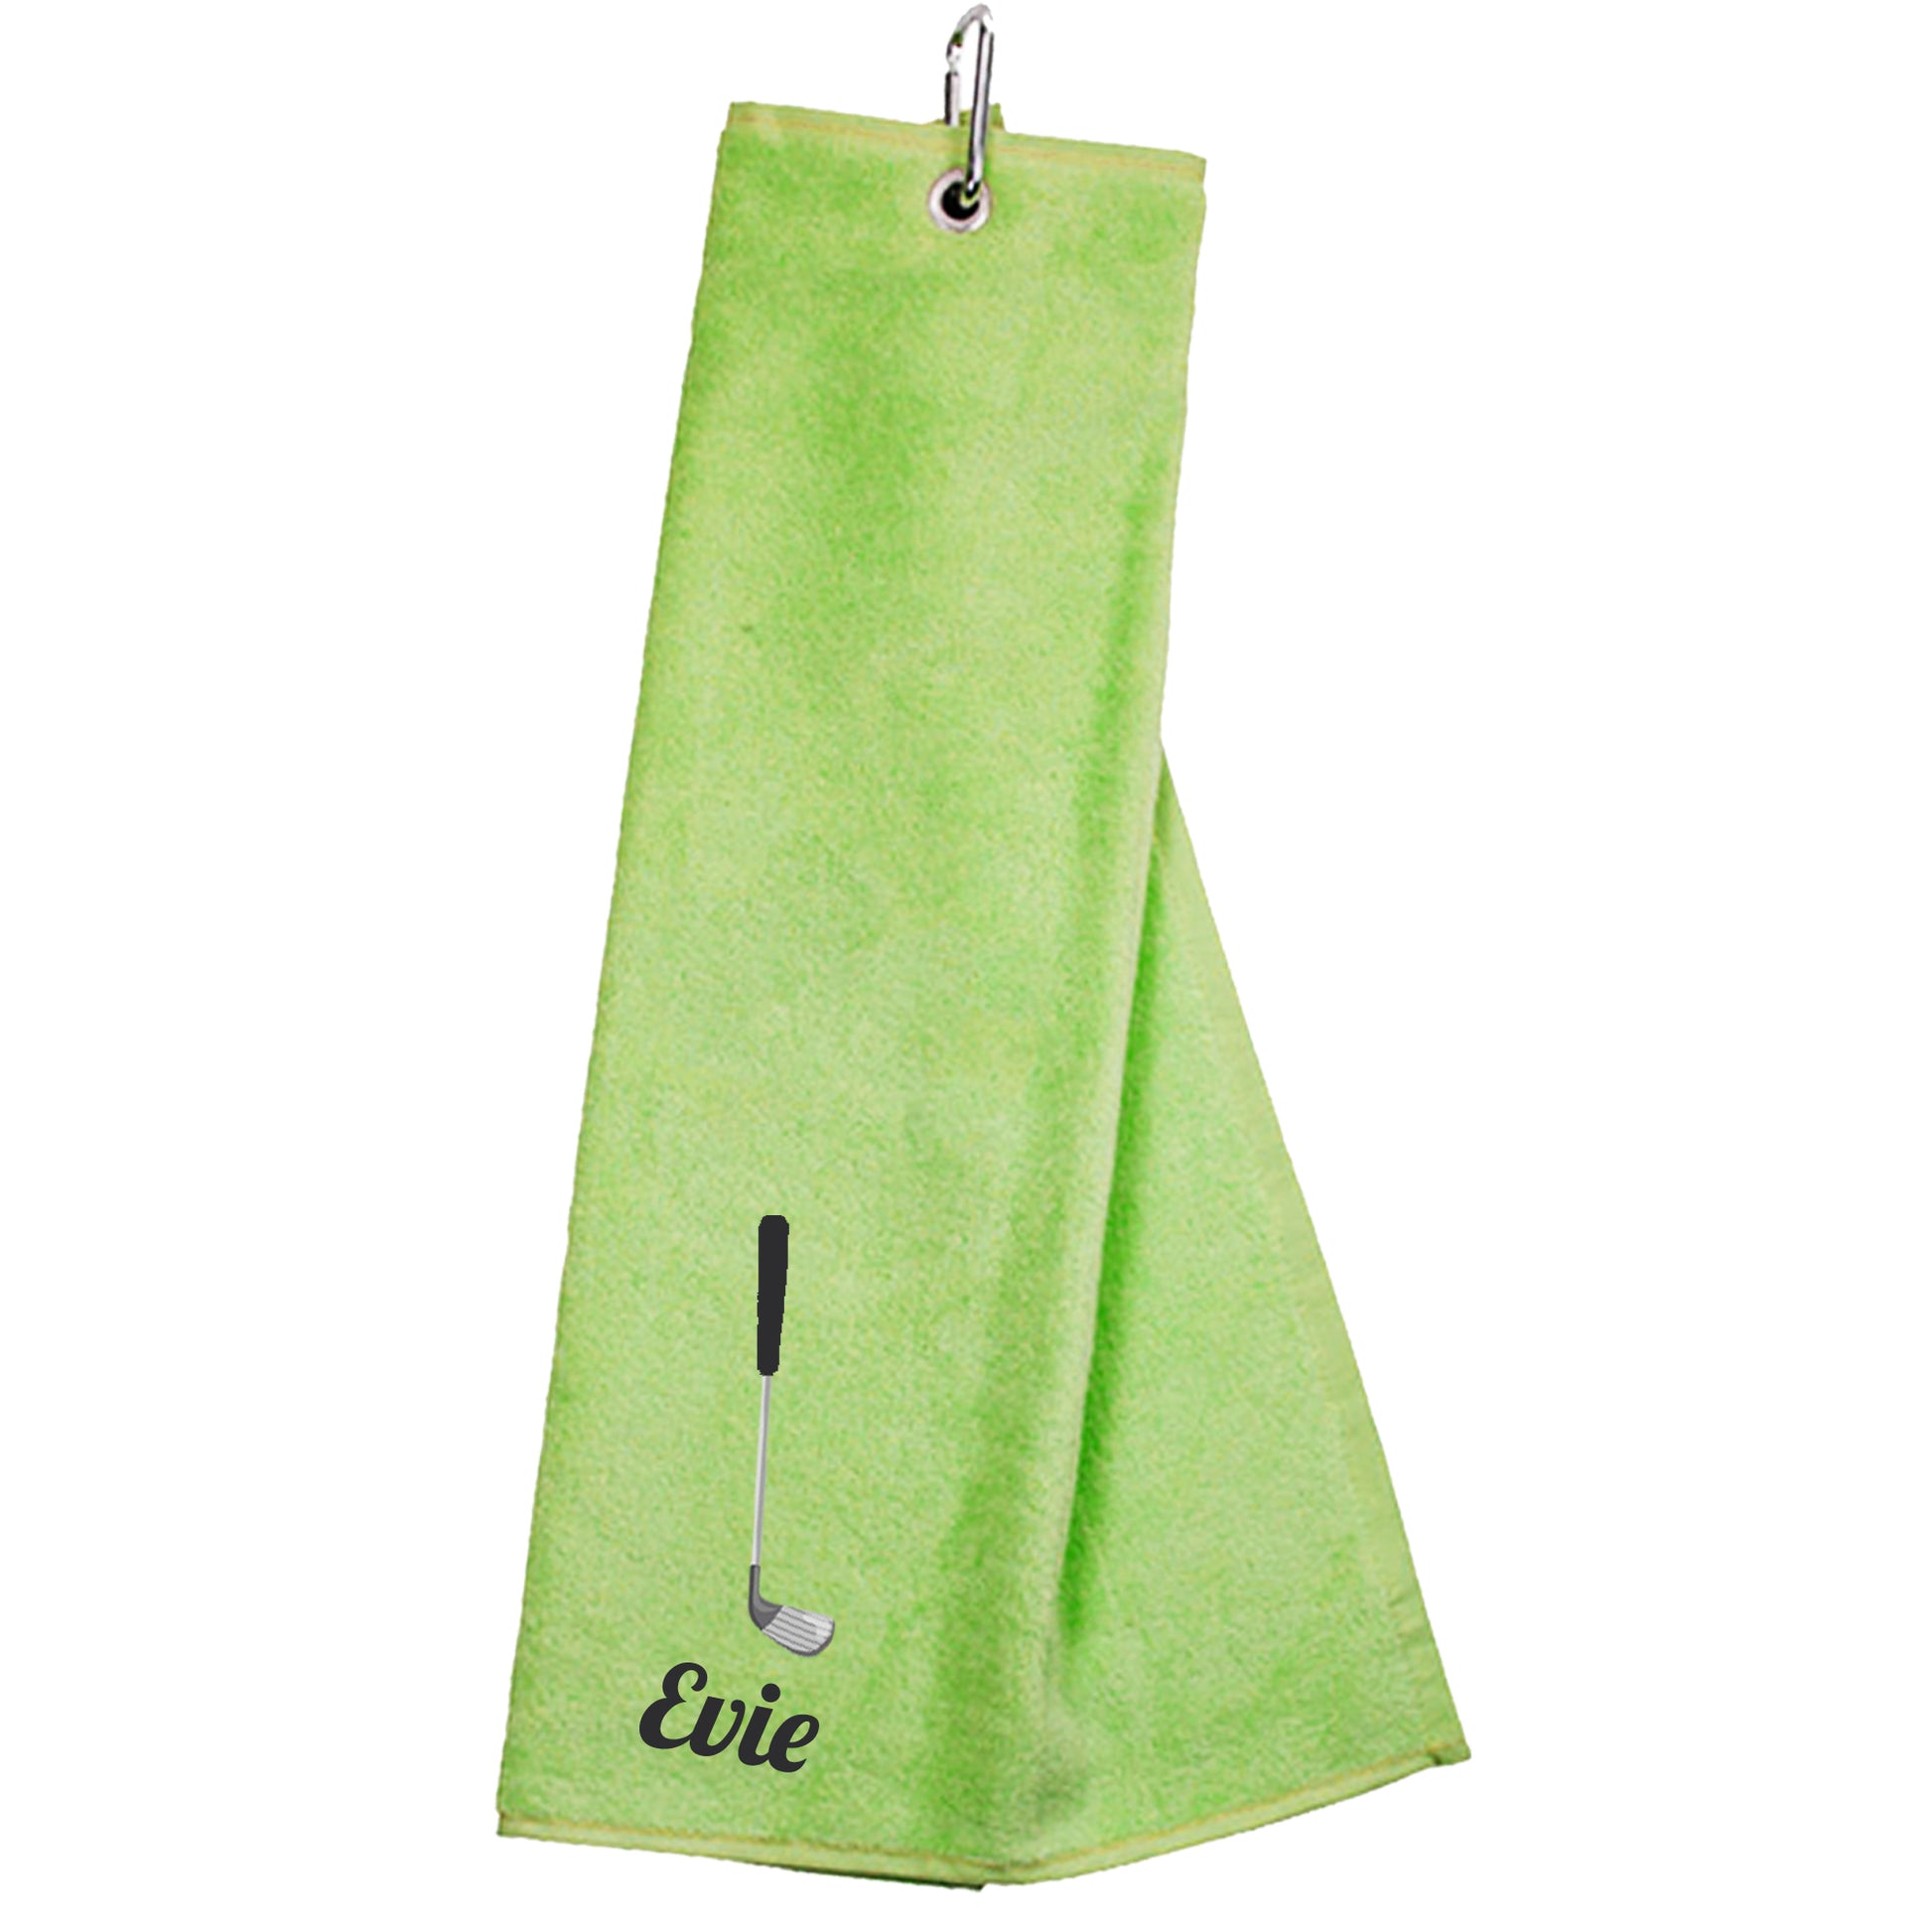 Personalised Embroidered Tri Fold GOLF Towel Trifold Towel with Carabiner Clip  - Always Looking Good - Light Green  